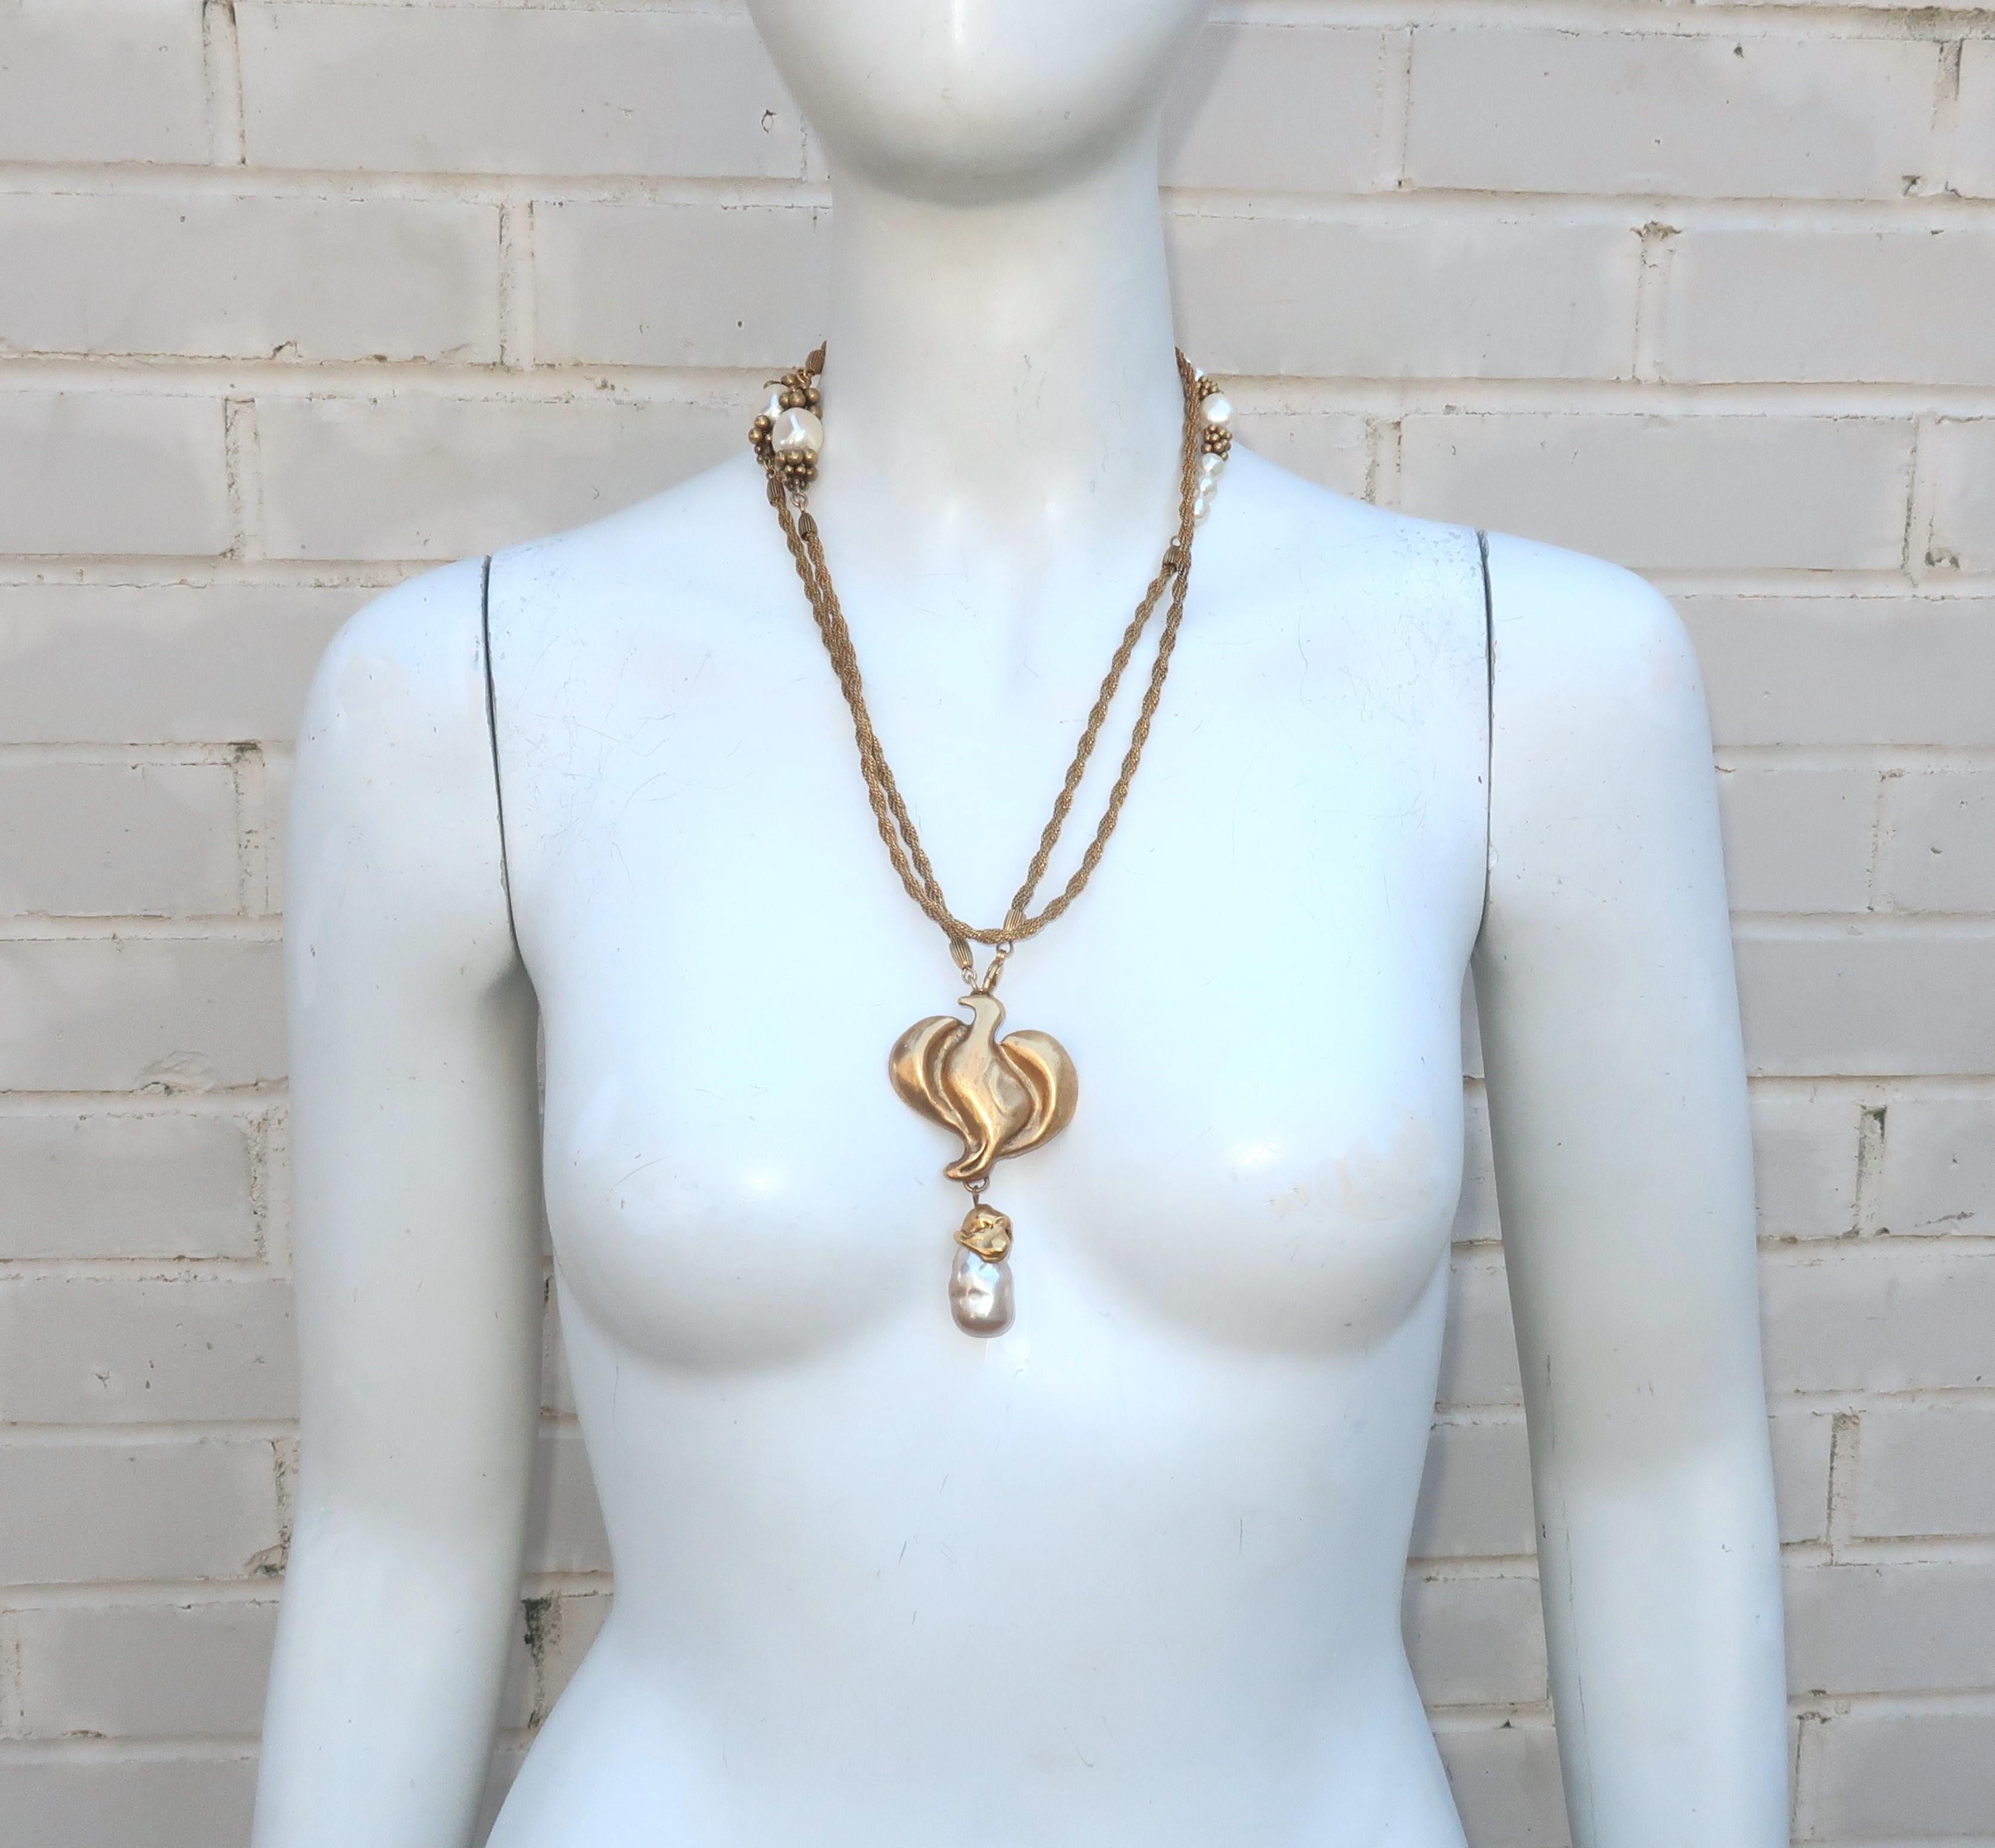 Donna Karan Attributed Gold Tone Bird Pendant Necklace With Baroque Pearls For Sale 5